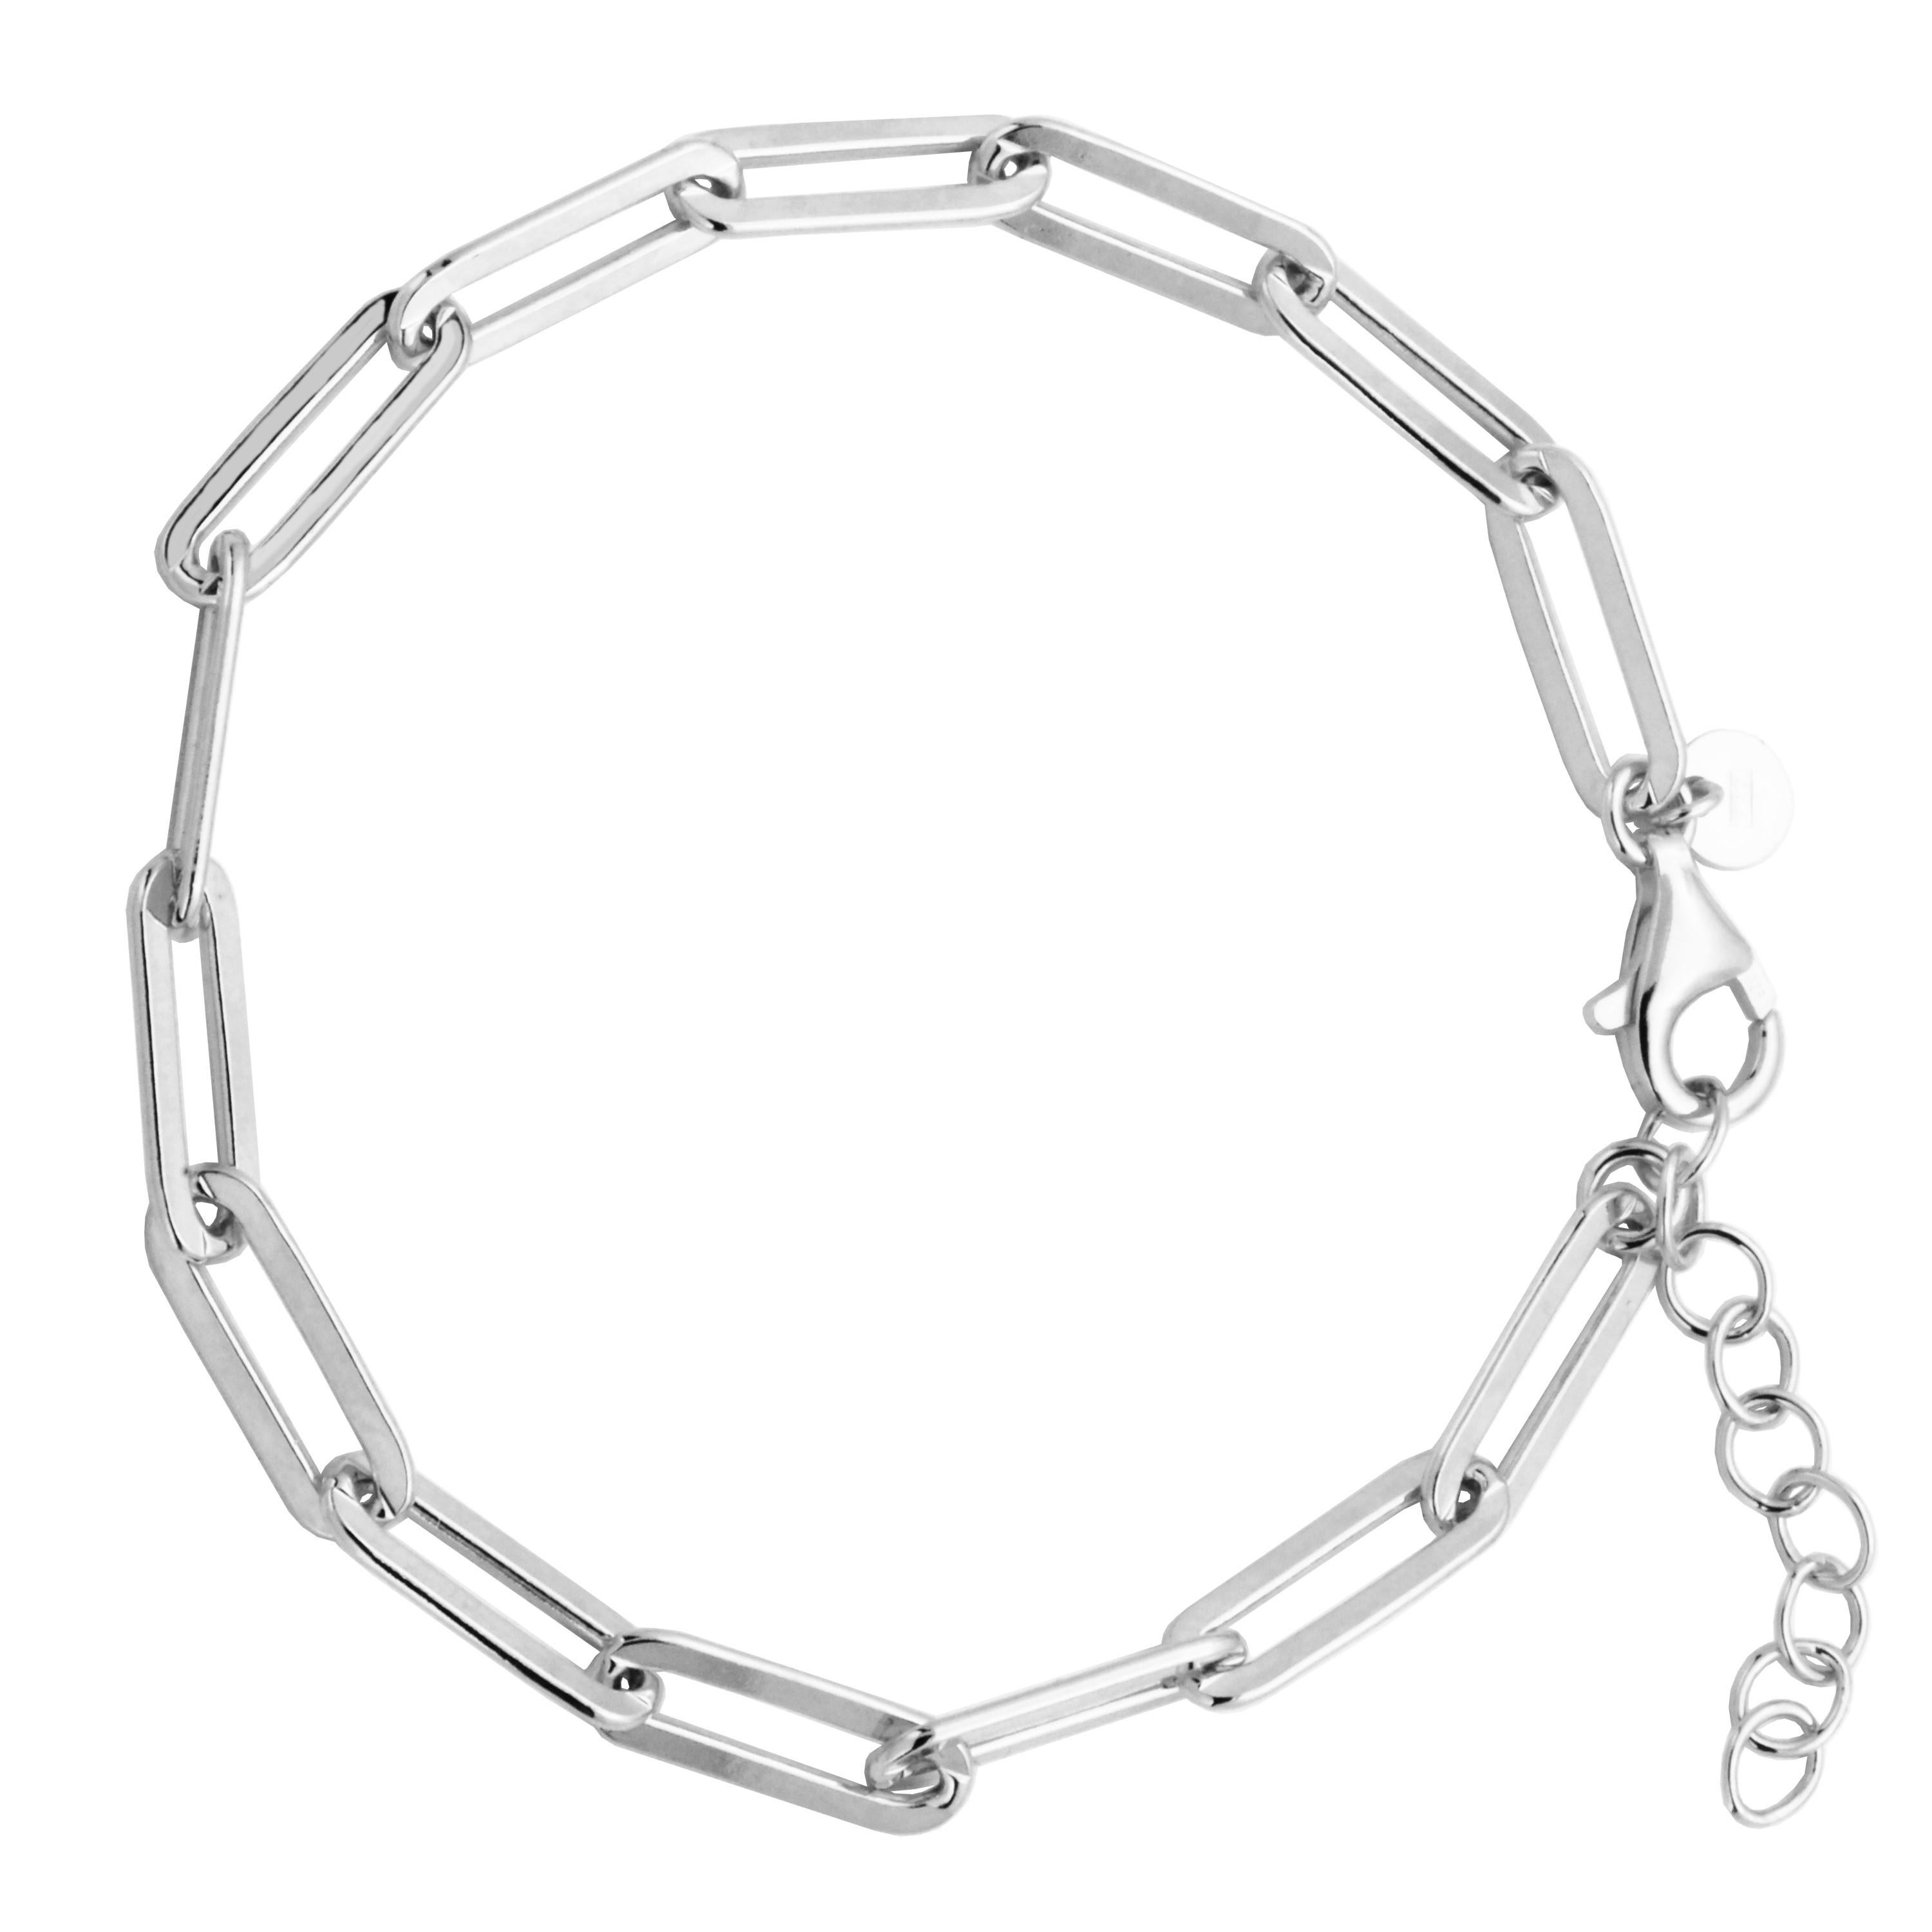 Sterling Silver Bracelet made with Paperclip Chain (5mm), Measures 6.75